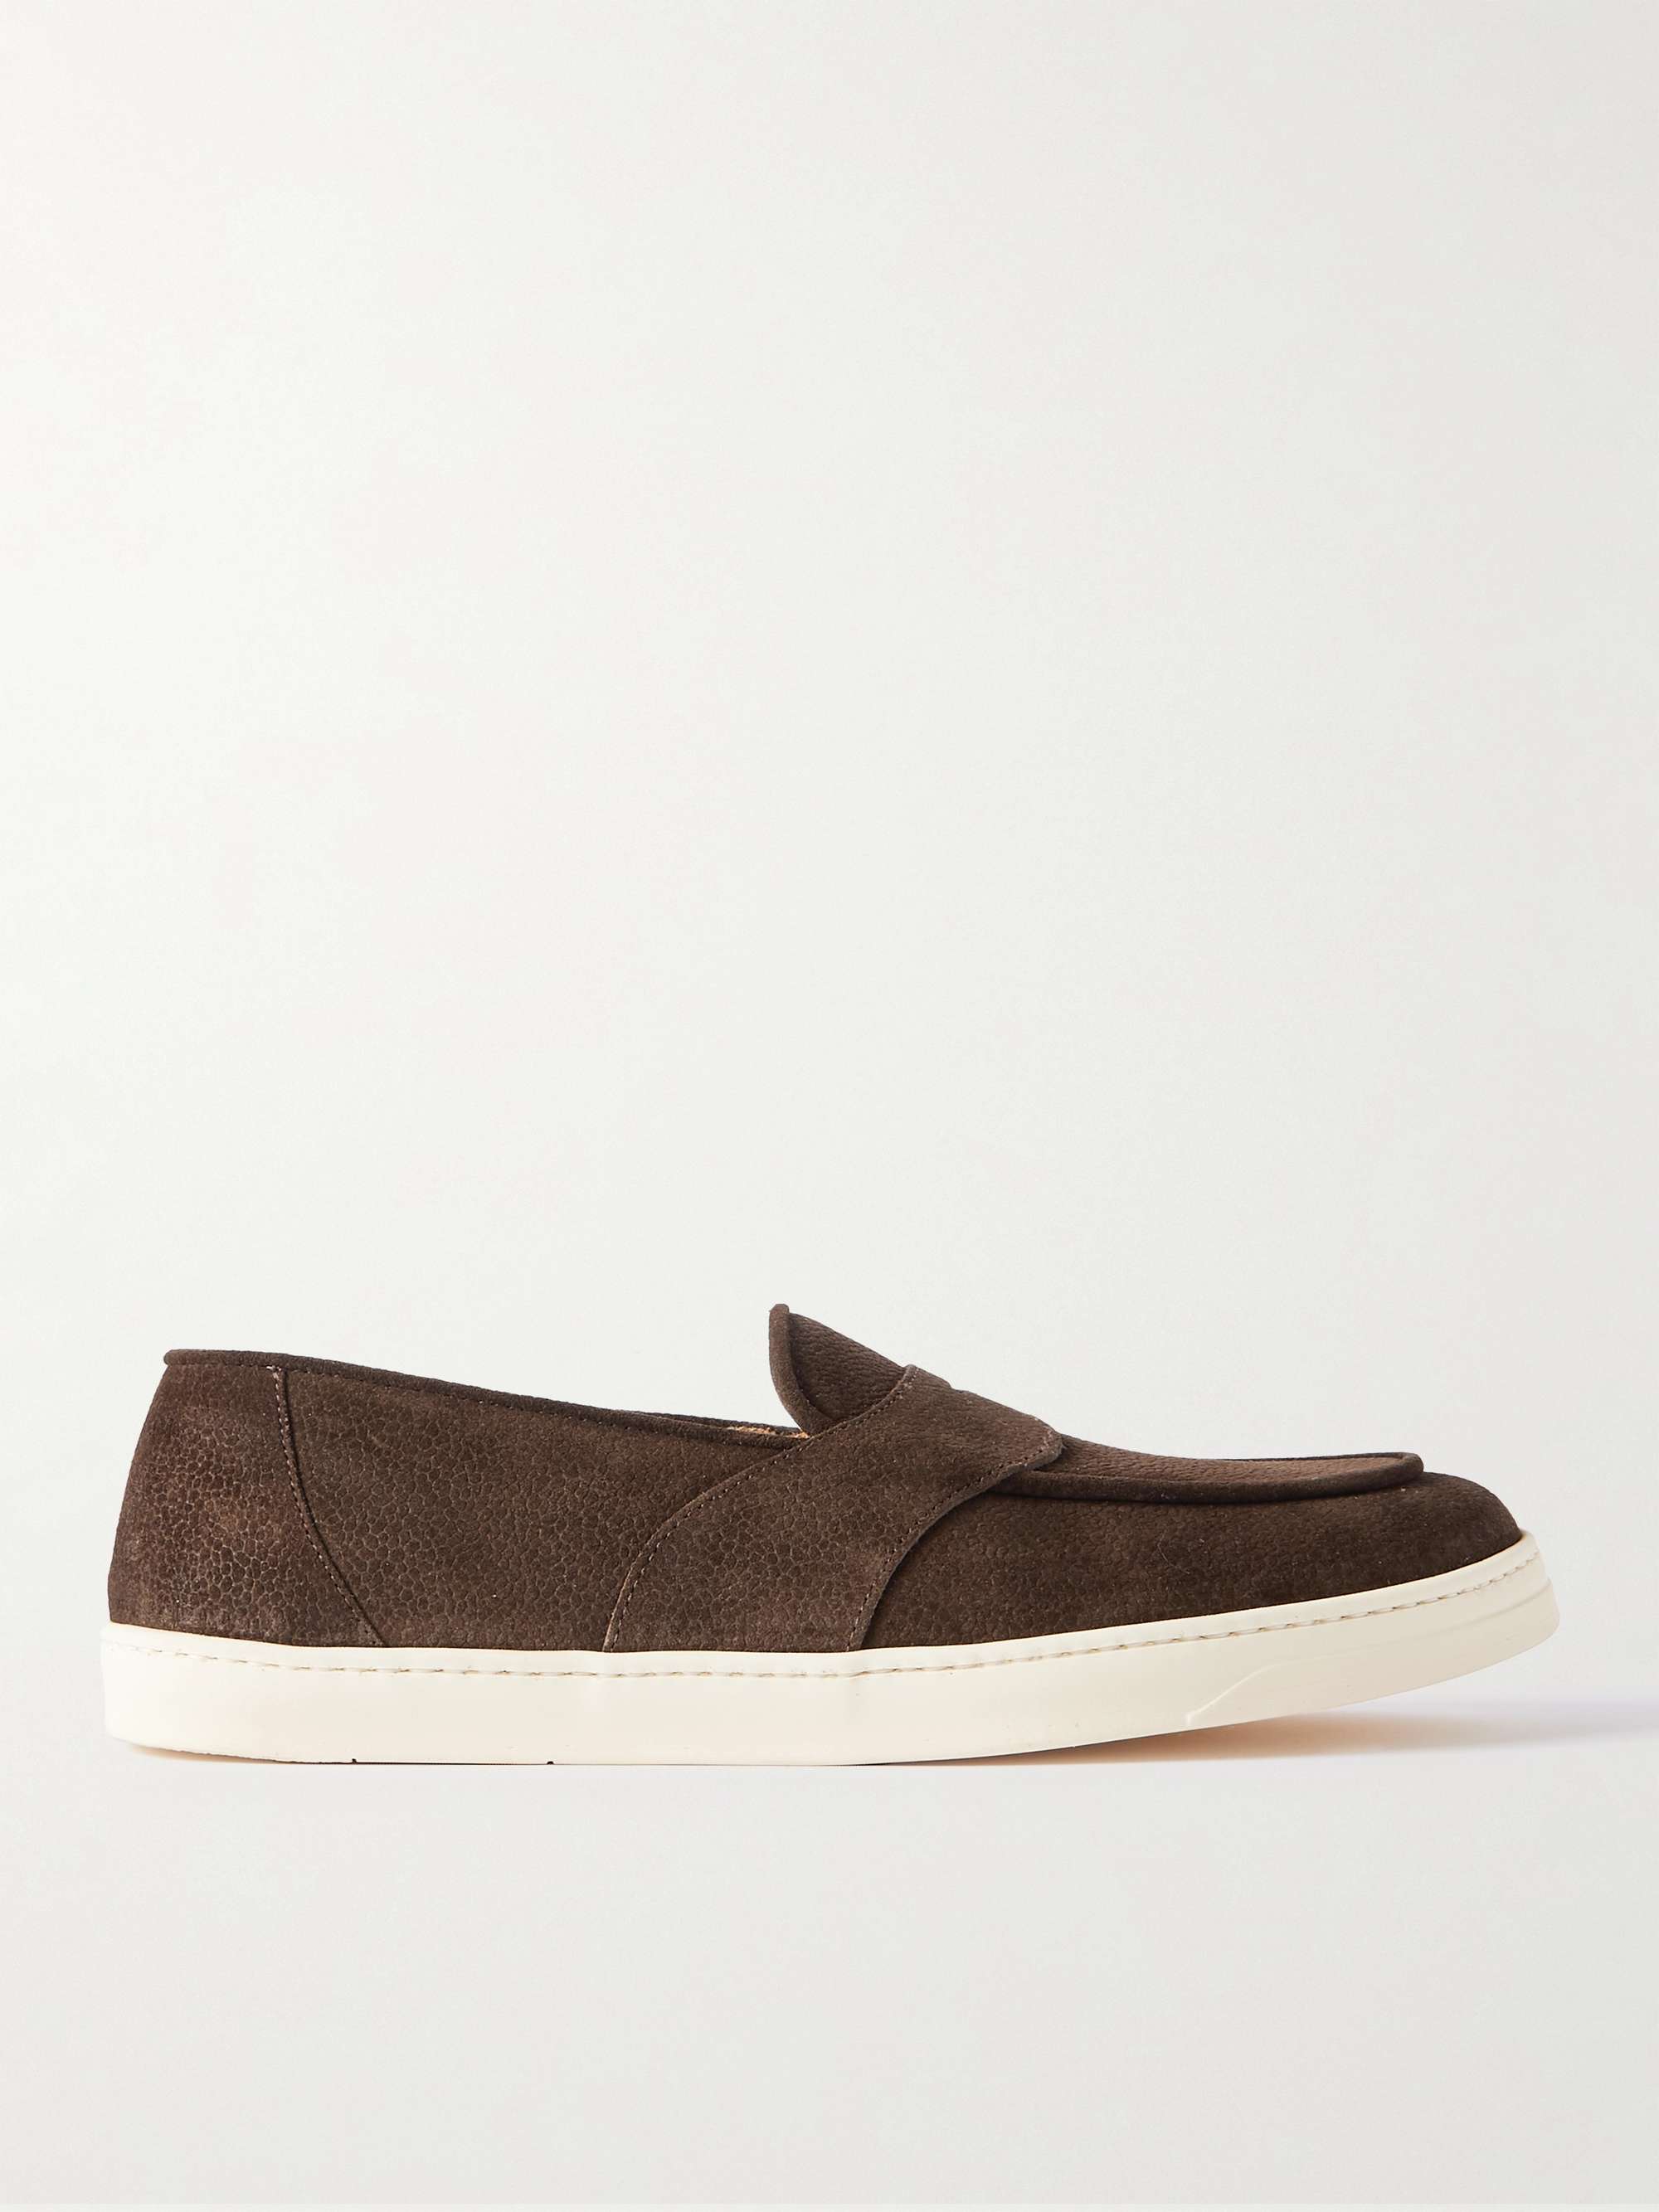 GEORGE CLEVERLEY Joey Full-Grain Suede Penny Loafers